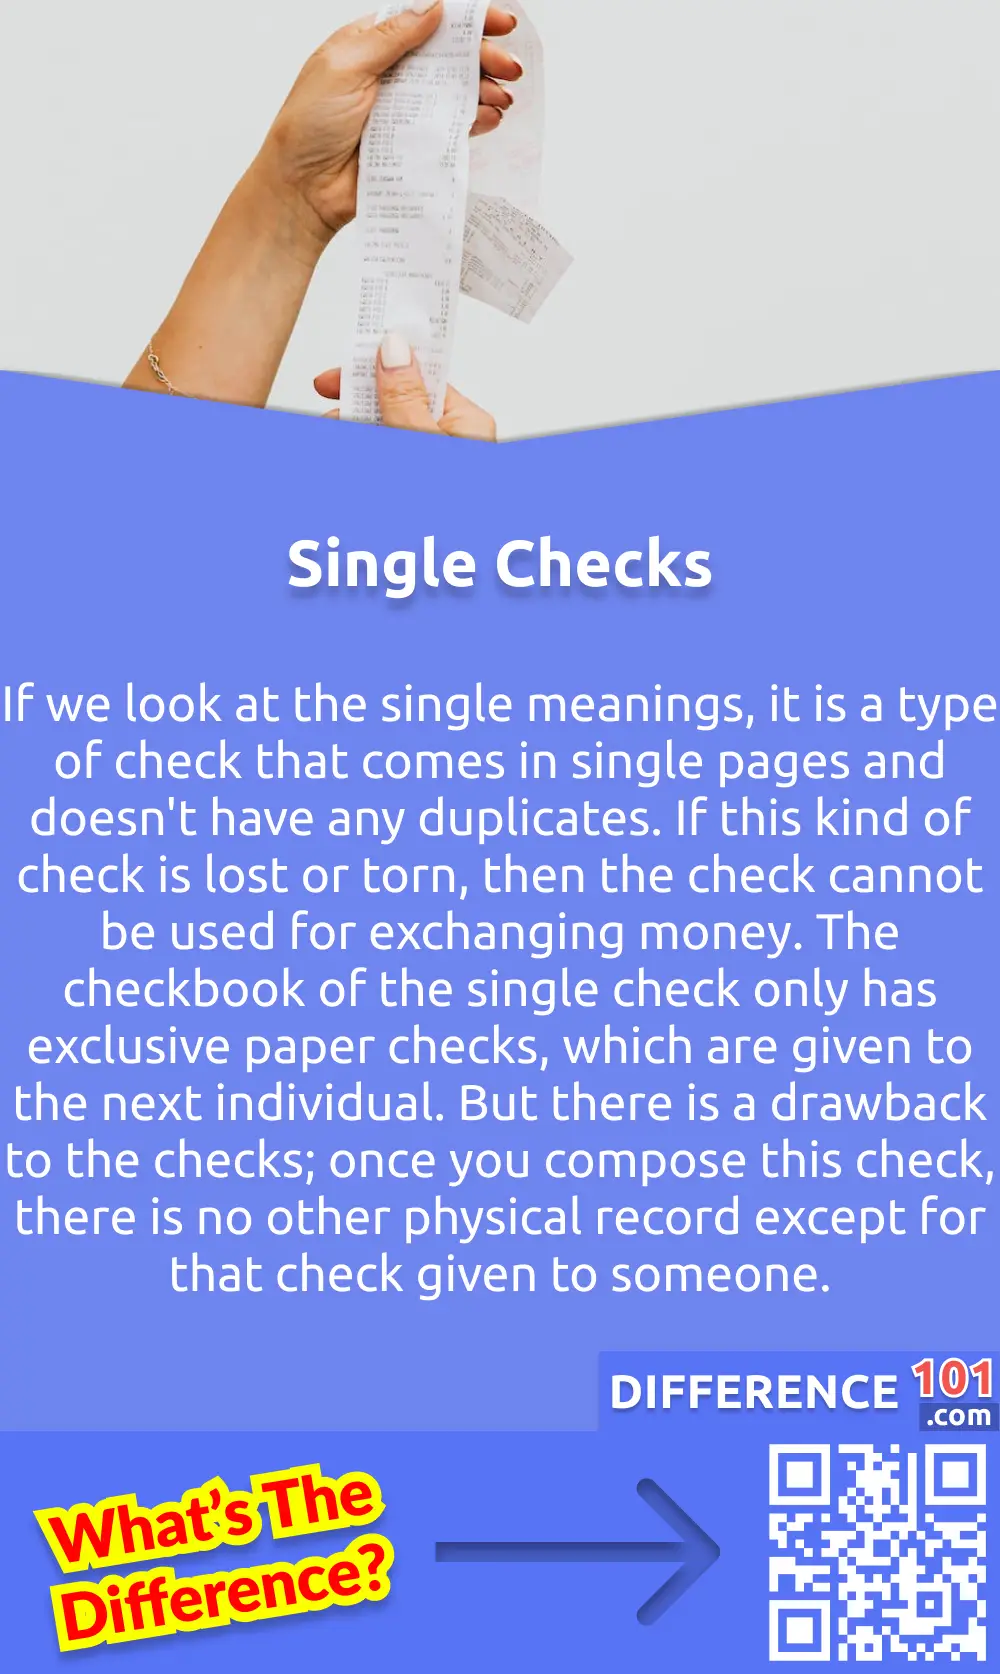 What Are Single Checks?
If we look at the single meanings, it is a type of check that comes in single pages and doesn't have any duplicates. If this kind of check is lost or torn, then the check cannot be used for exchanging money. The checkbook of the single check only has exclusive paper checks, which are given to the next individual. But there is a drawback to the checks; once you compose this check, there is no other physical record except for that check given to someone. Single checks are also planned to be used with a check register because every time you compose a check, the installment's measure must be recorded. The checkbook of the single check is less bulky because it has less number of pages as compared to the duplicate check. Moreover, it also has a lower price as compared to duplicate checks.